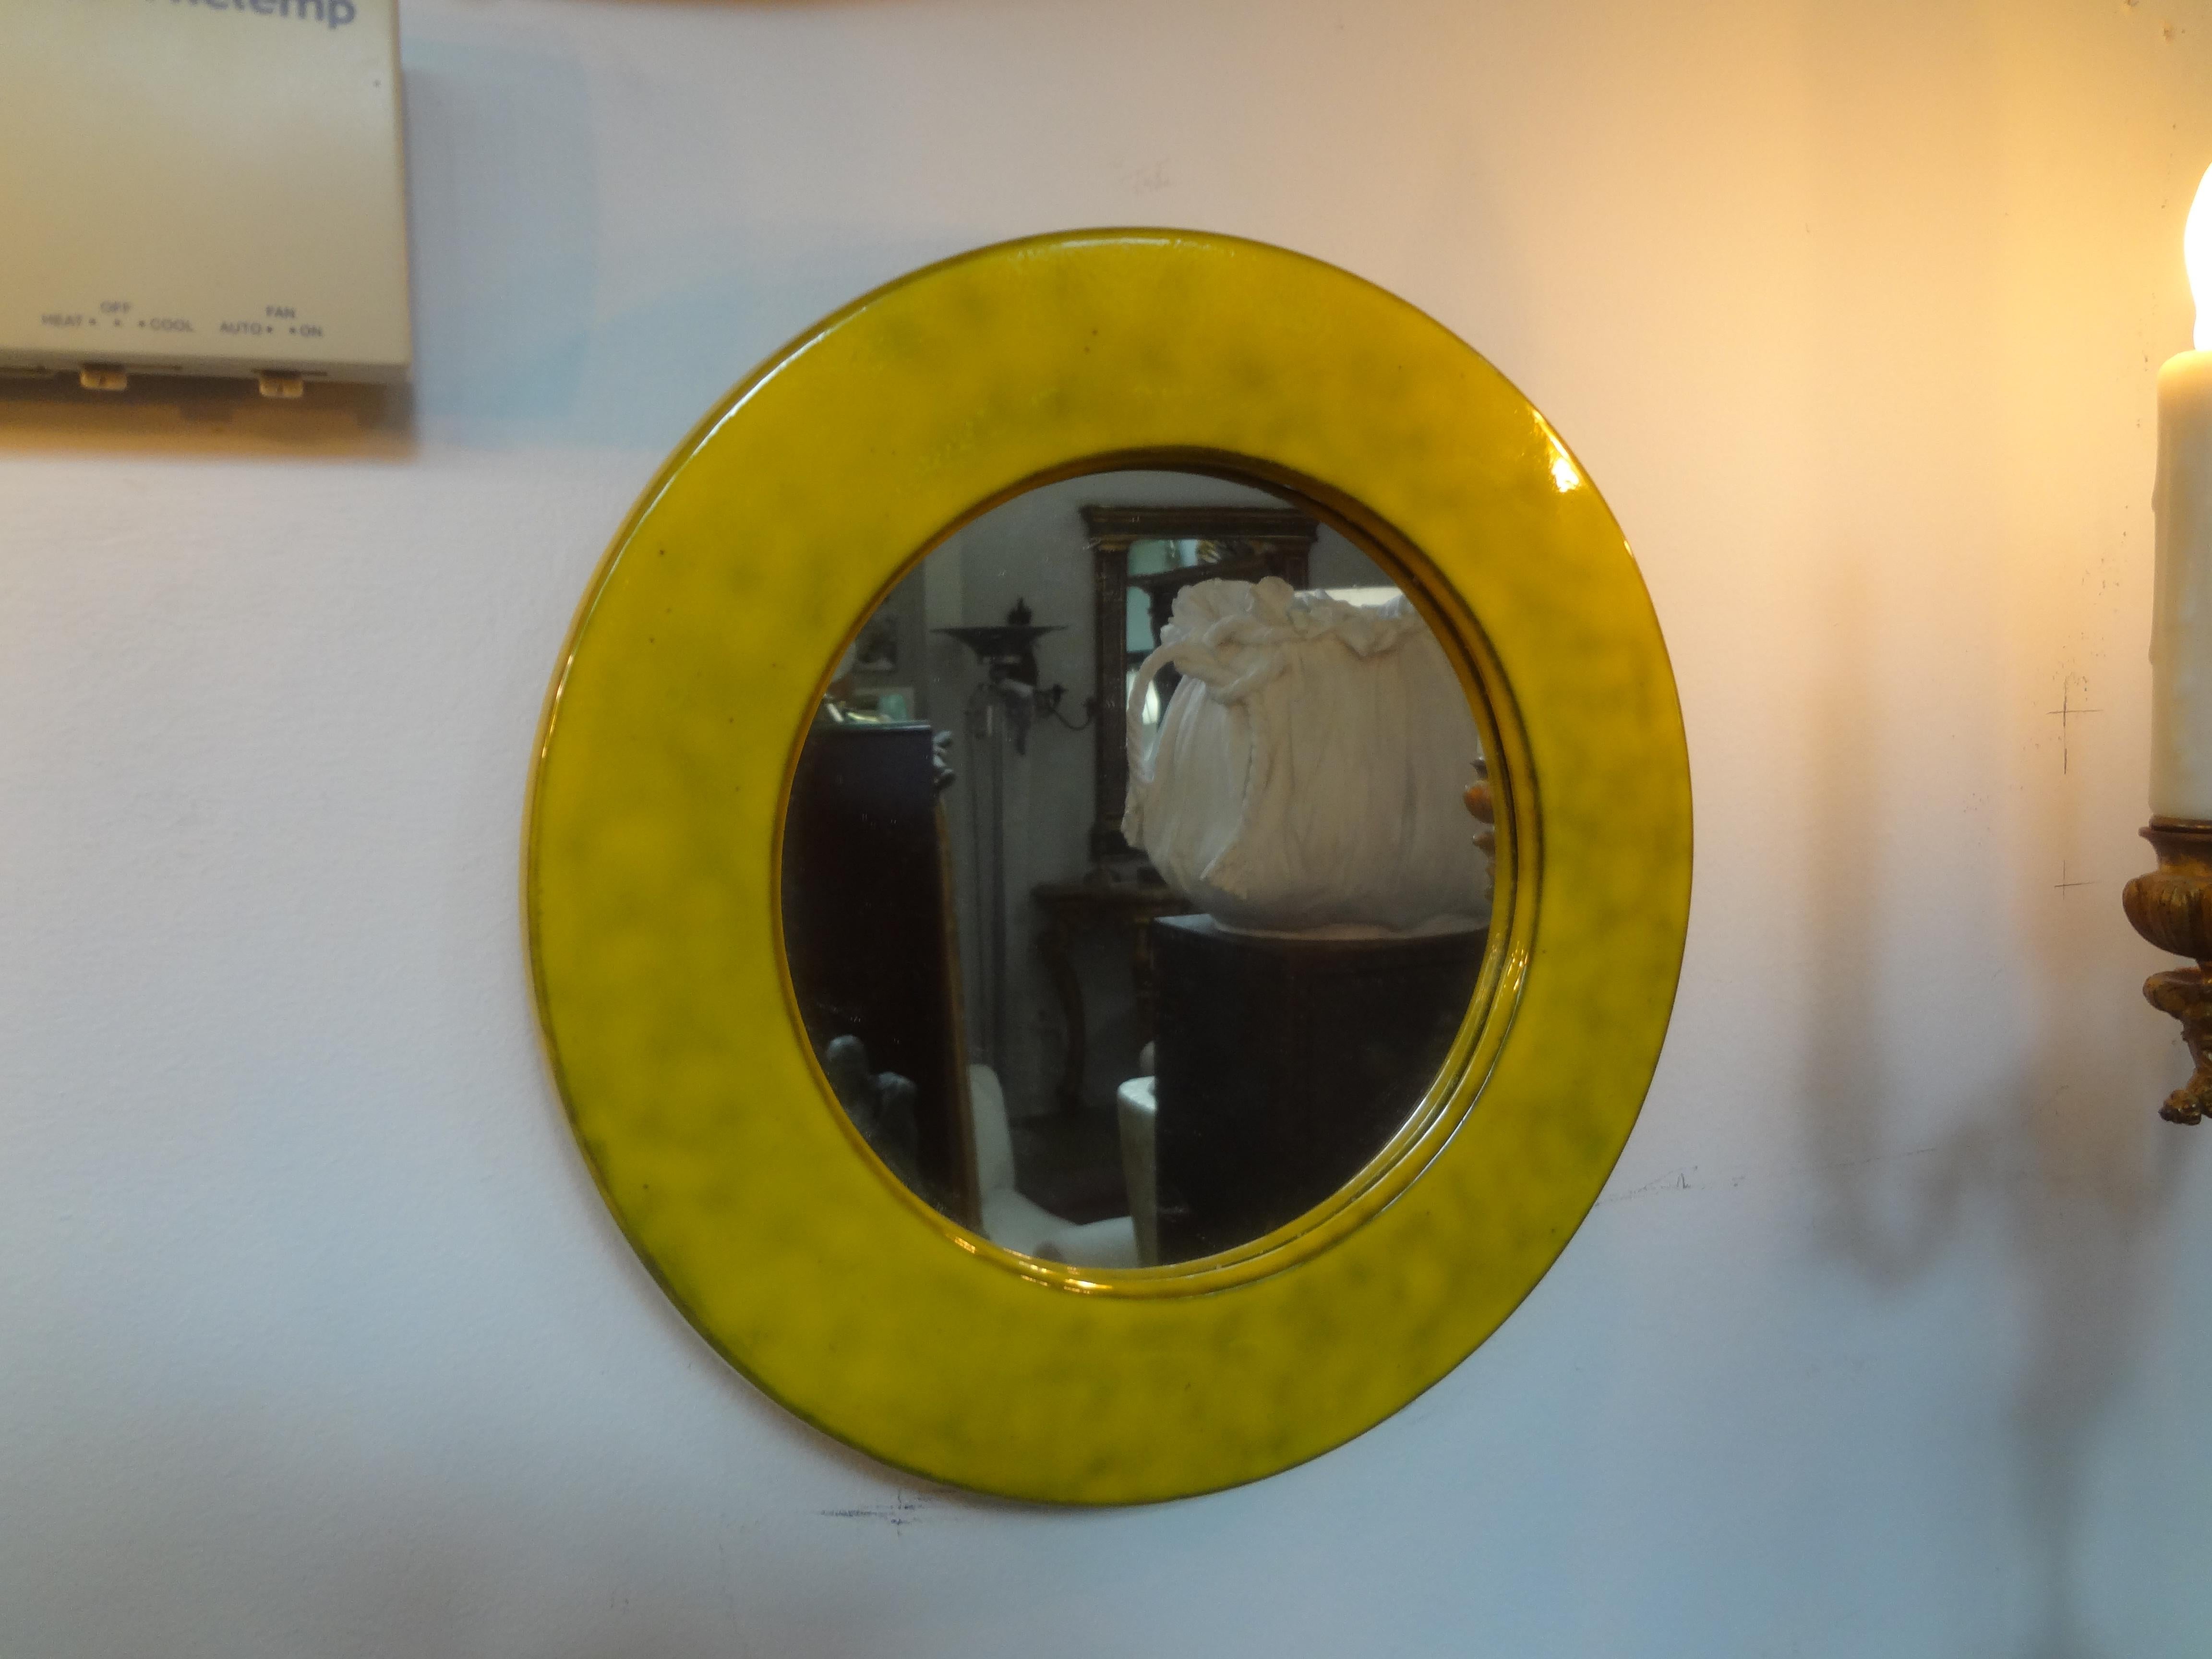 Italian Mid-Century Modern enamel mirror. This stunning mirror is a beautiful shade of yellow and would look great alone or grouped with a variety of other mirrors.